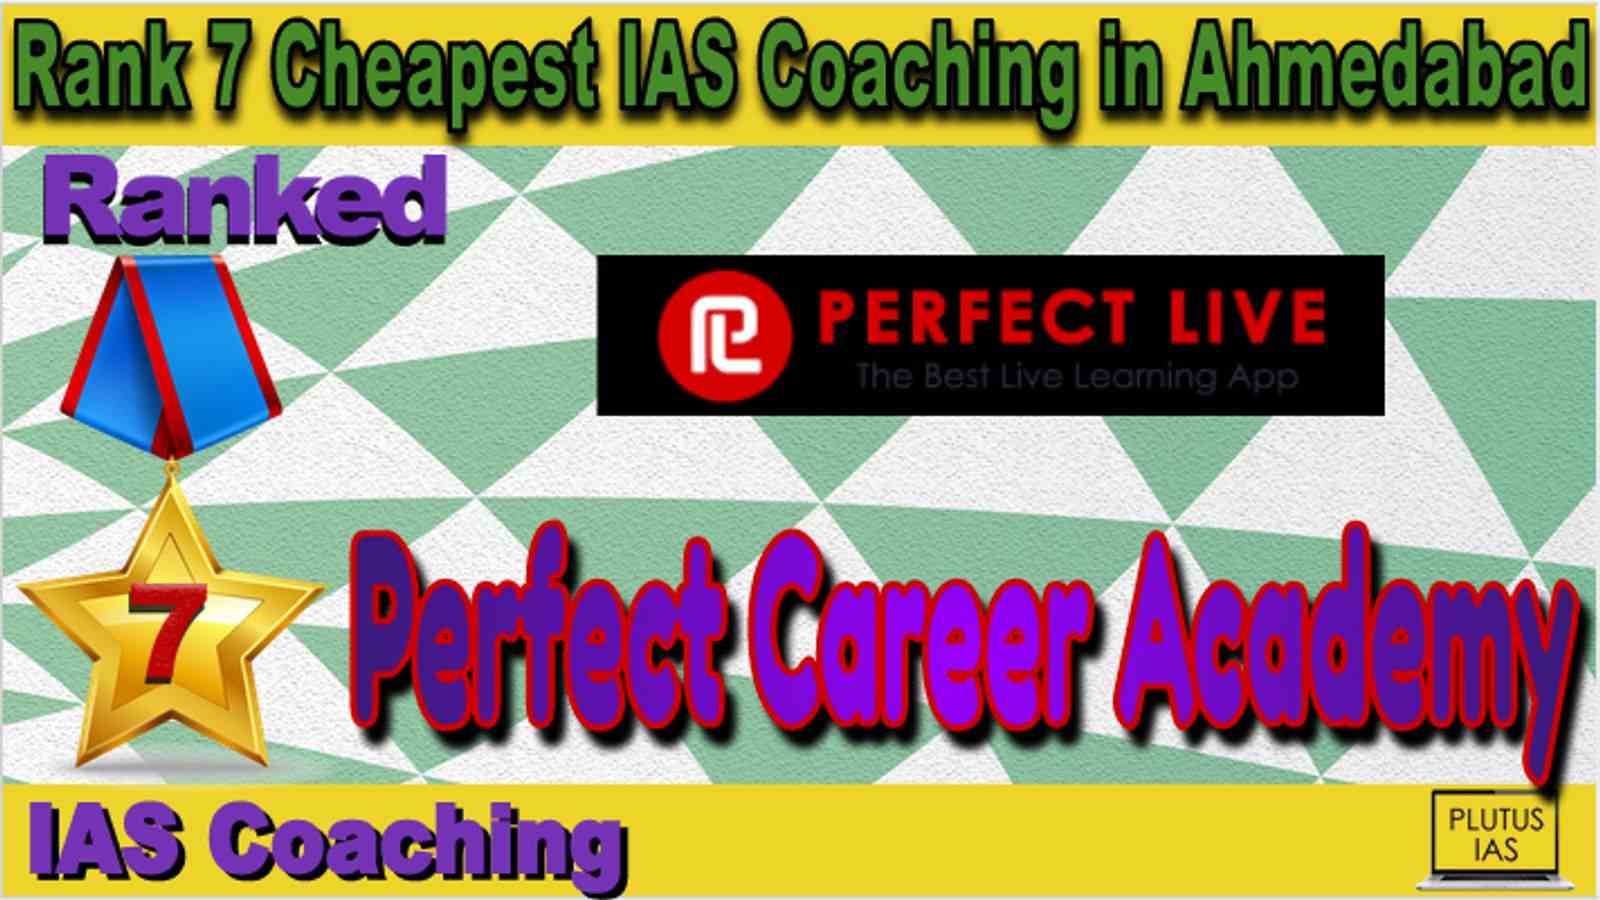 Rank 7 Cheapest IAS Coaching in Ahmedabad